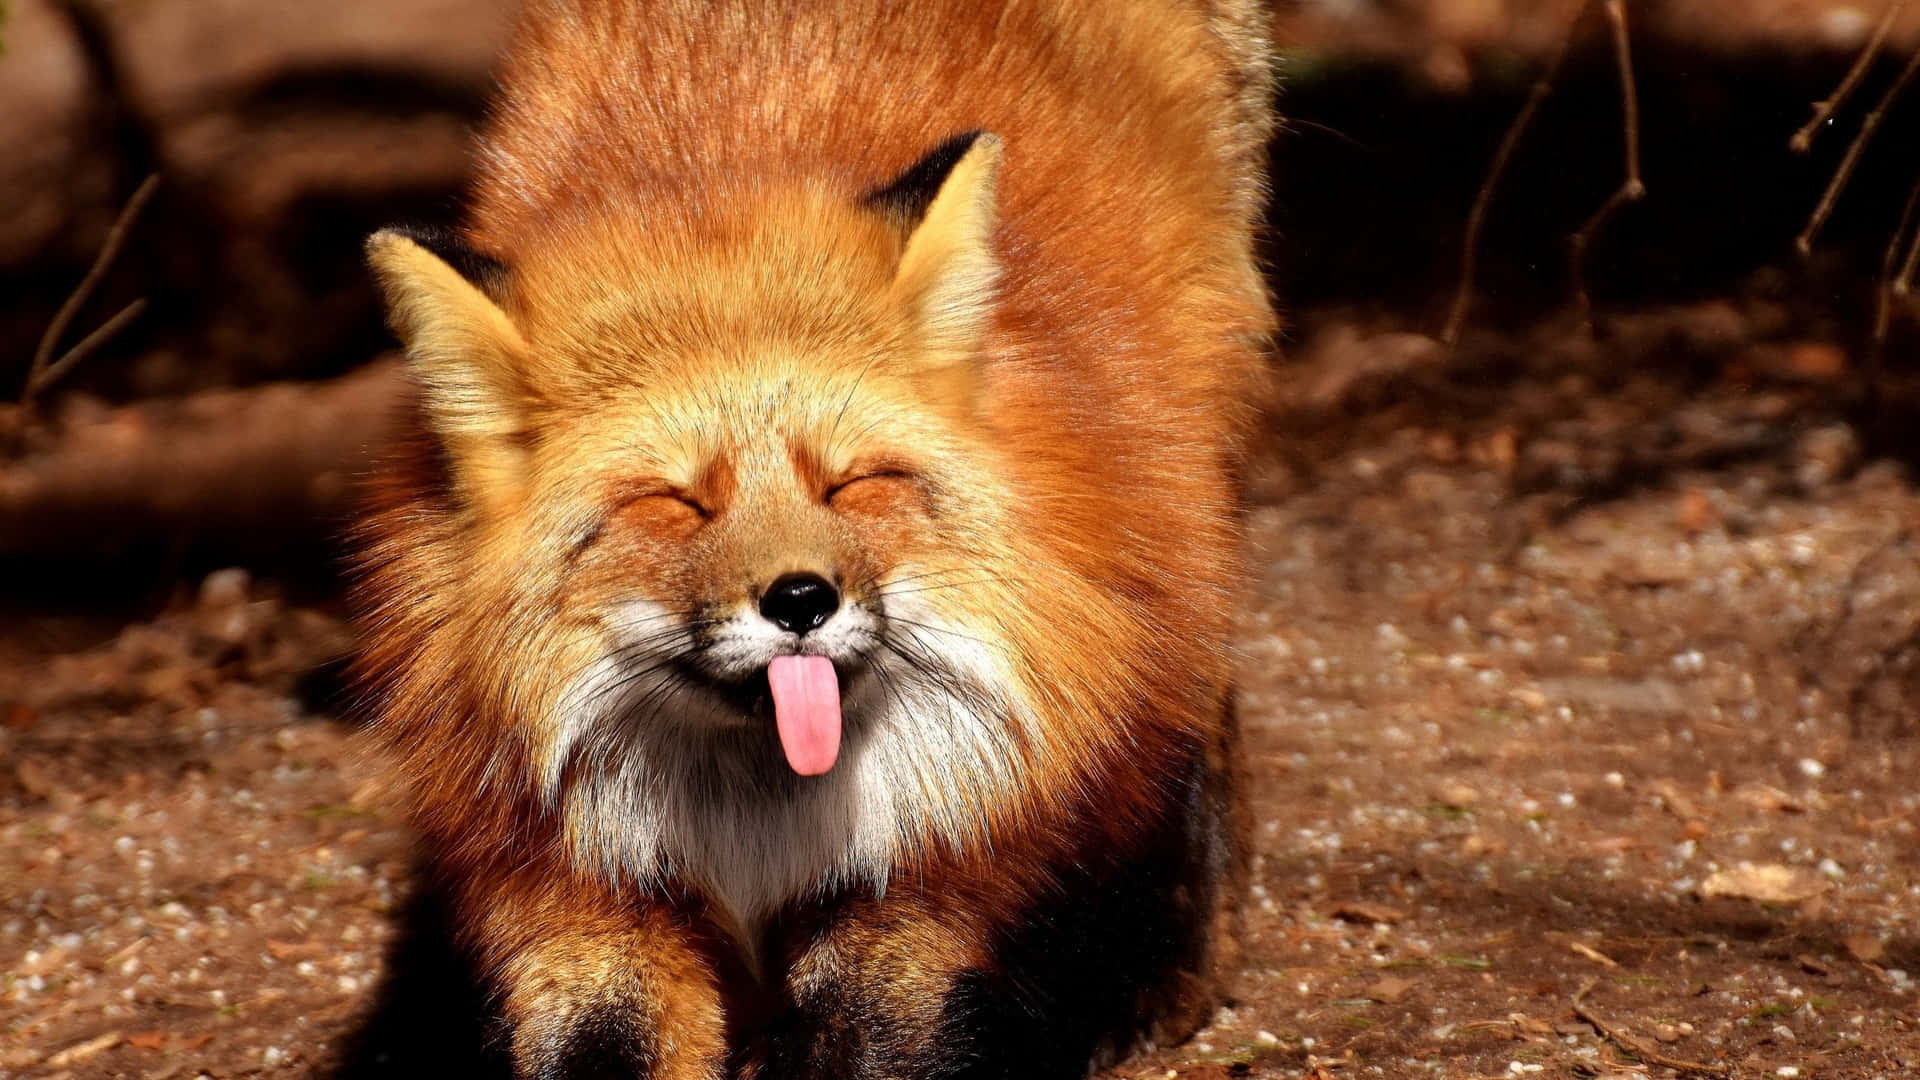 Cool Fox Smiling Tongue Out Wallpaper